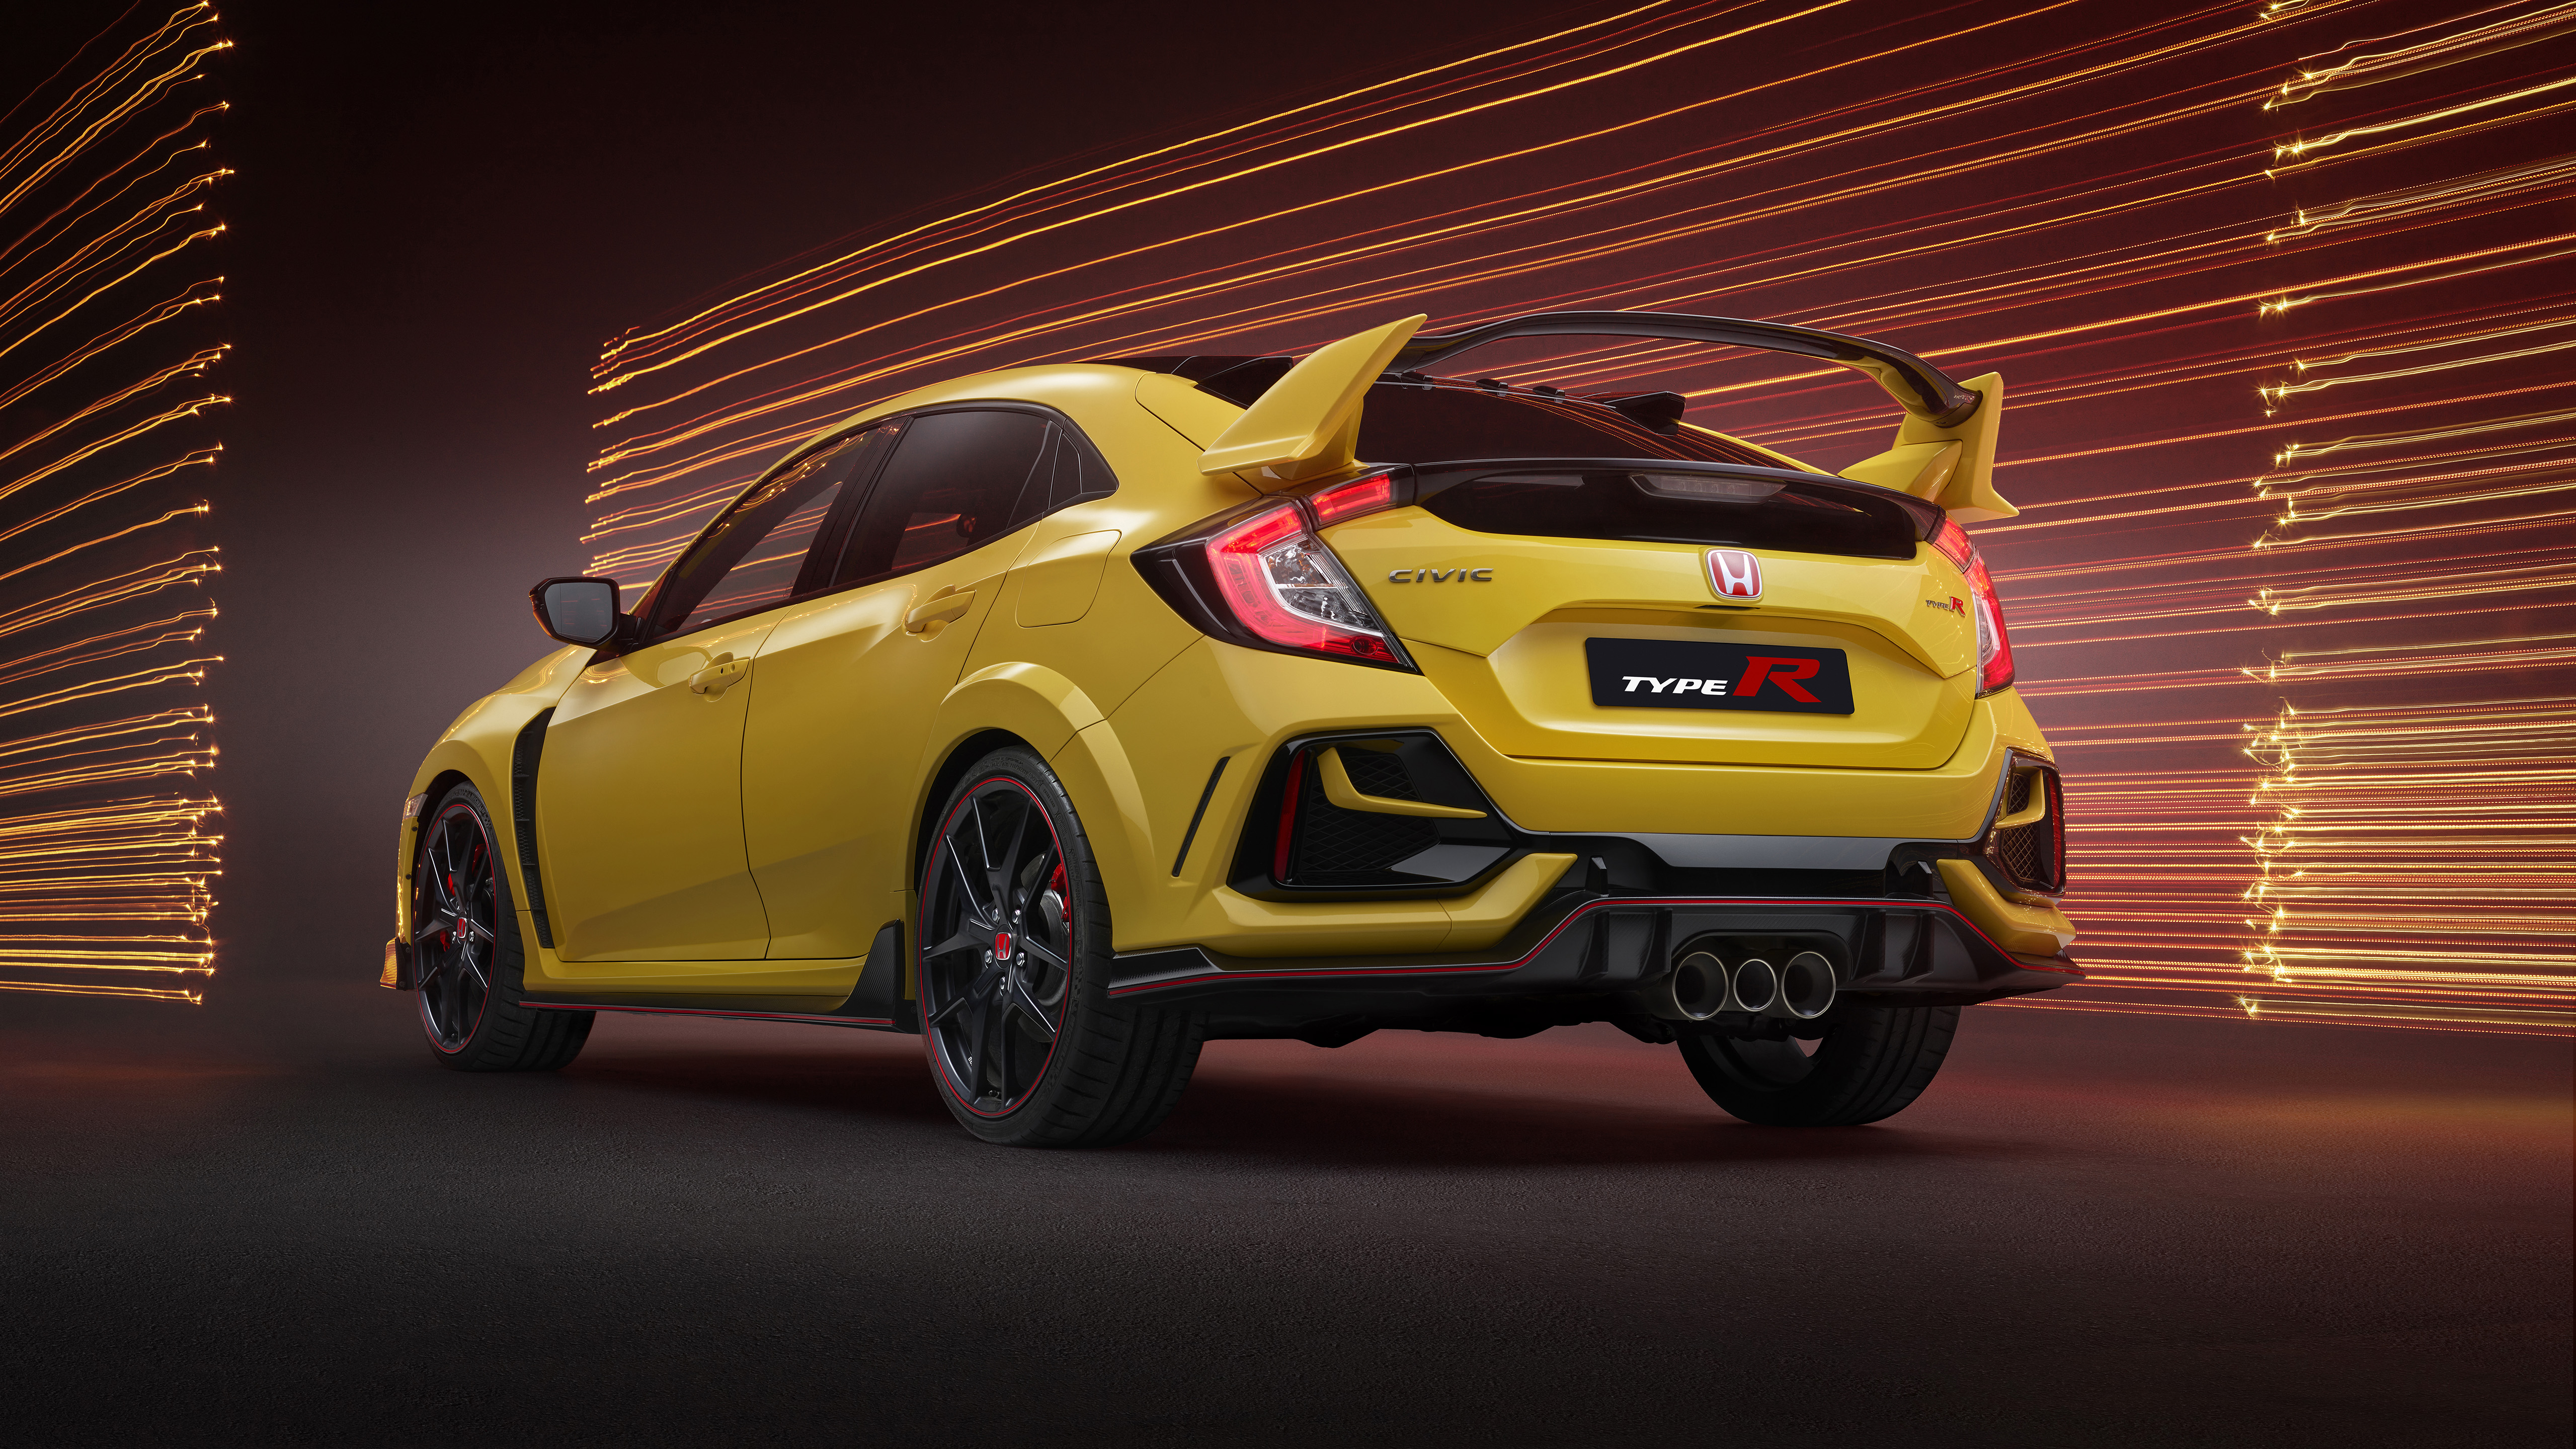 Honda Civic Type R Limited Edition 5k 2 Wallpaper Hd Car Wallpapers Id